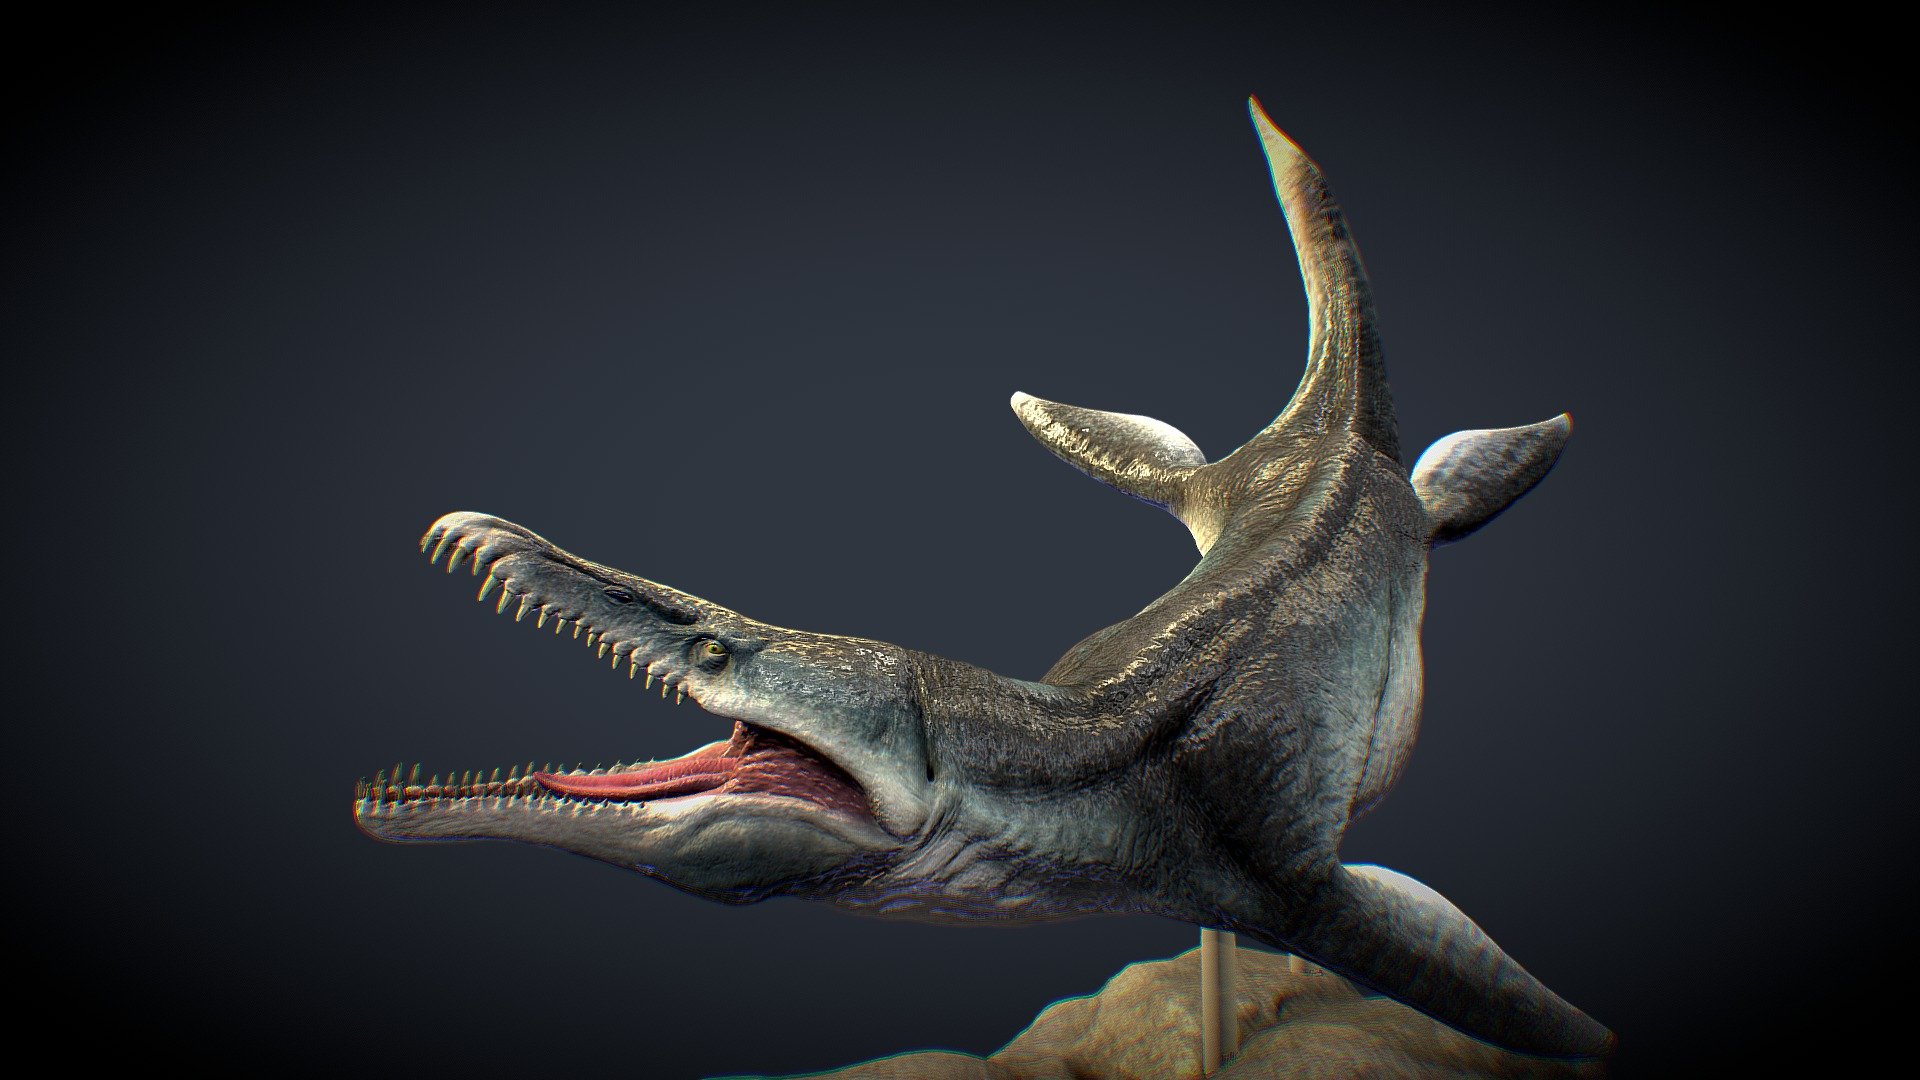 New prehistoric animal, kronosaurus!

Here I leave you some links so you can see how the exploded view and the render are:

https://www.deviantart.com/drrarts/art/Kronosaurus-render-911685987
https://www.deviantart.com/drrarts/art/Krono-despiece-911686063

What you see in sketchfab is of lower quality than what is really there due to the limits of polygons but I have added some separate files where the quality is much better.

If you are not convinced by the cuts or the breakdown, don't worry because it also includes a version without cuts or booleans with which you can modify them to your liking.

Please, if you like my work, I would appreciate a review and a score for my model, it would help me a lot to continue with my work and upload more models.

Finally, I accept suggestions if you would like to have a specific species 3d model